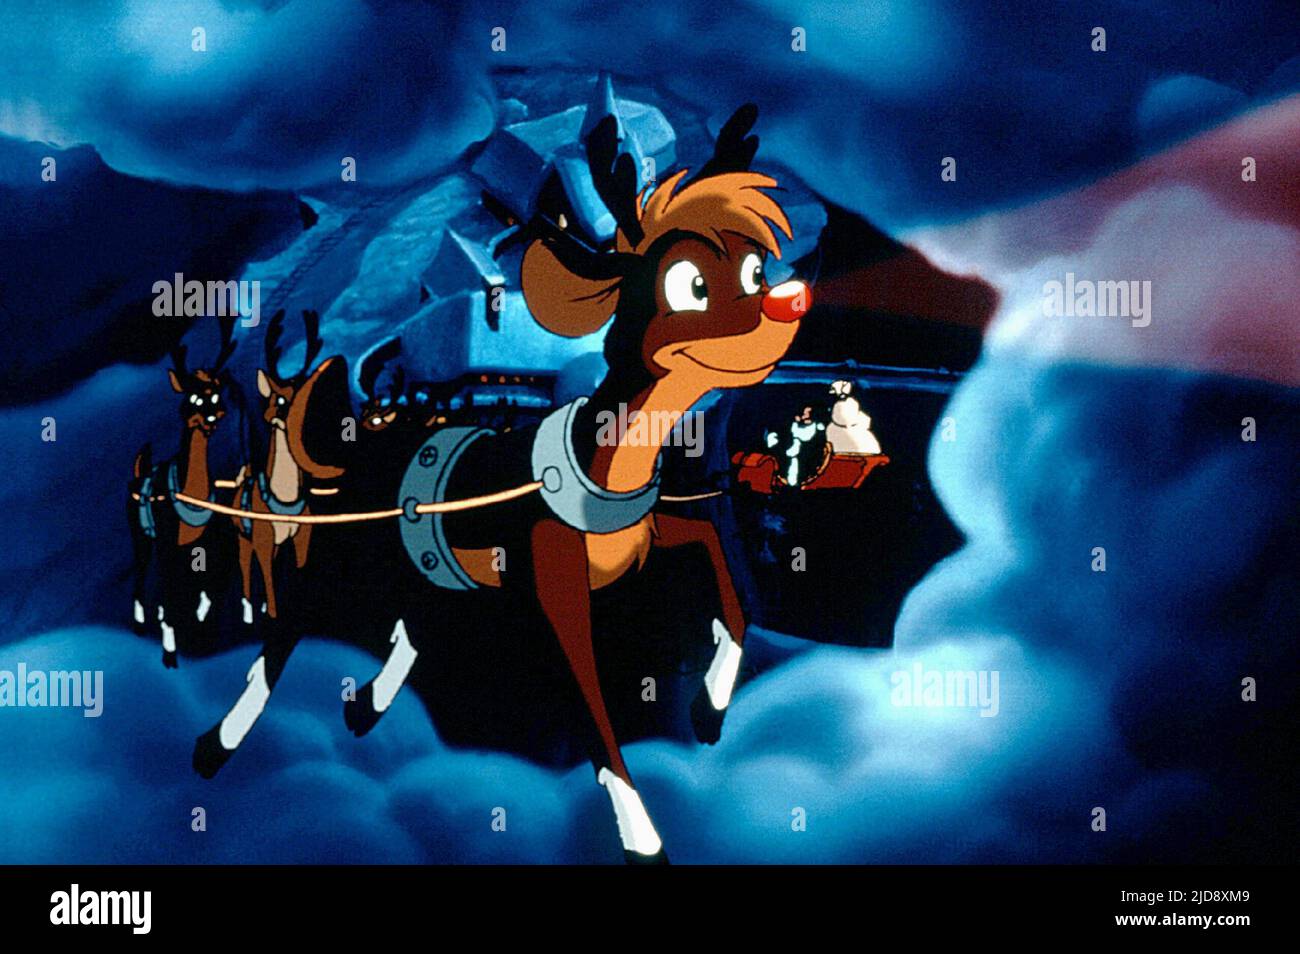 RUDOLPH, RUDOLPH THE RED-NOSED REINDEER, 1998, Stock Photo